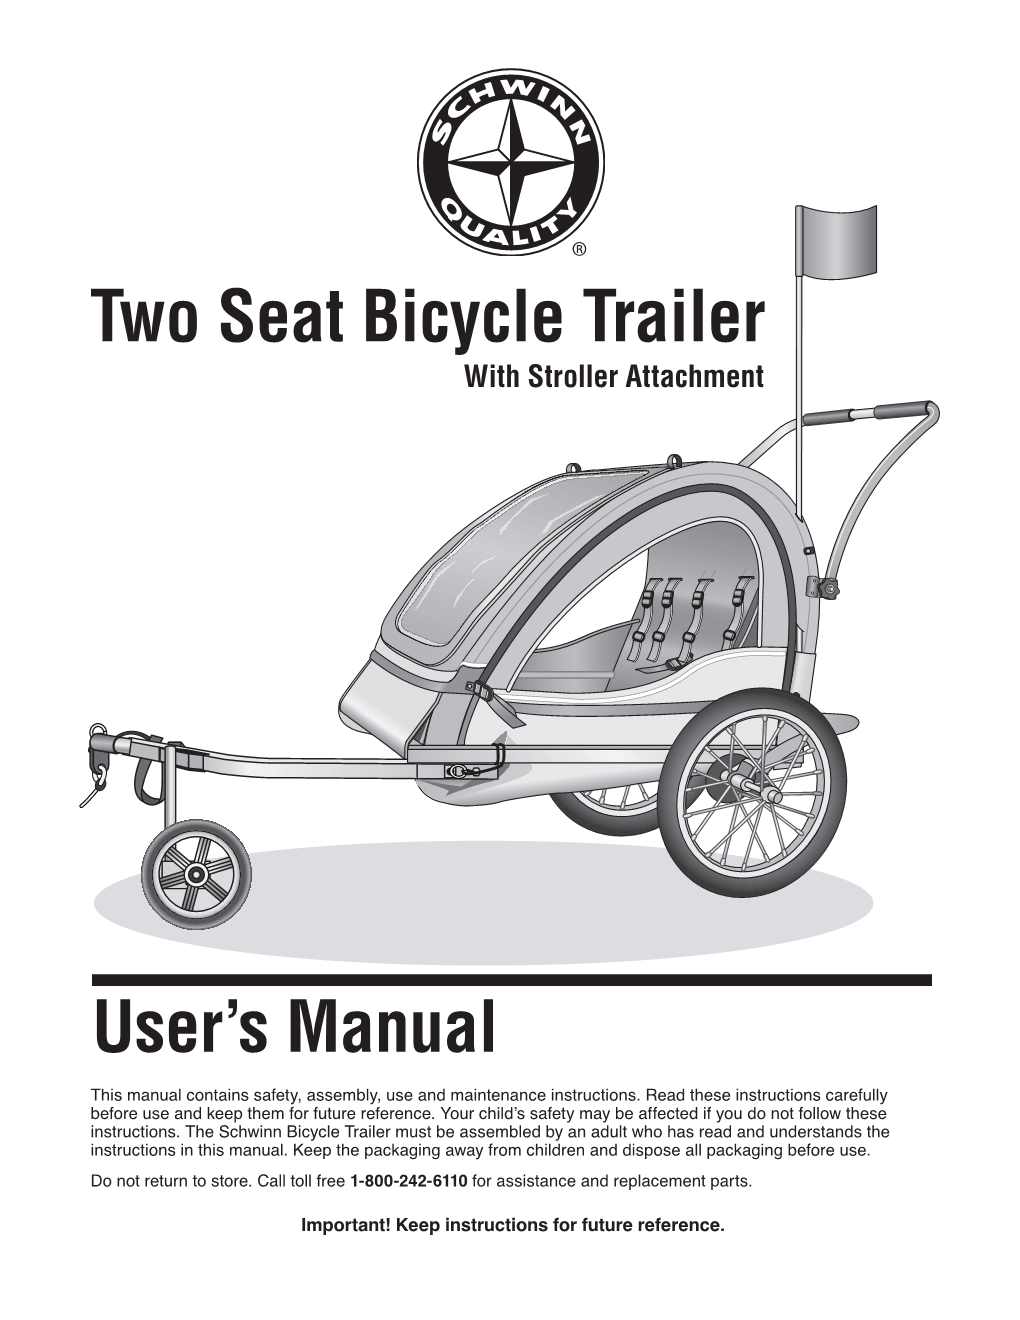 User's Manual Two Seat Bicycle Trailer